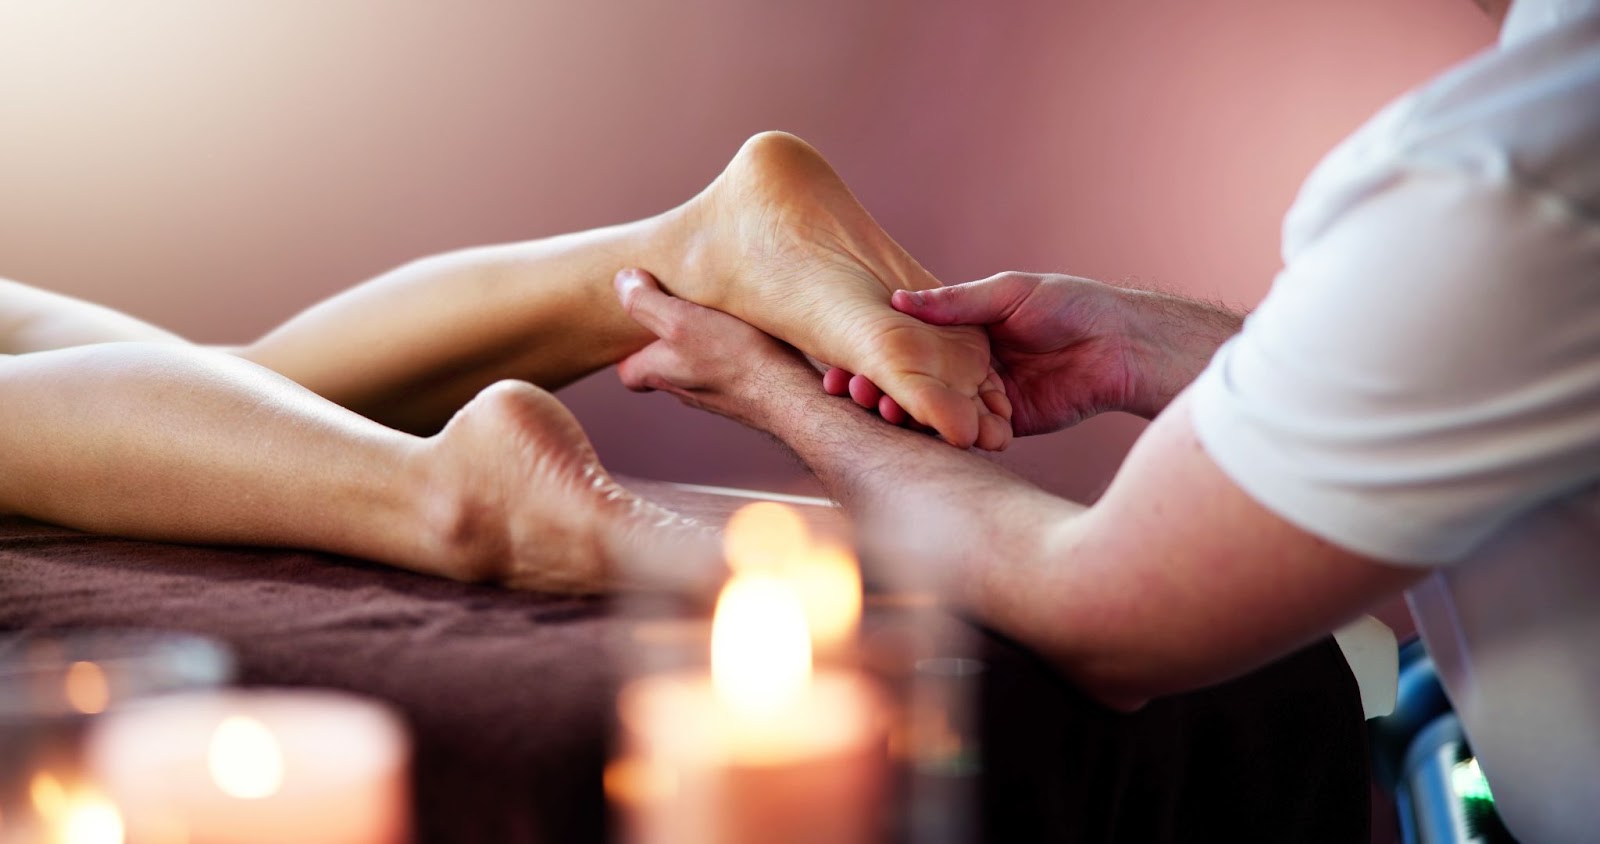 A person receiving foot reflexology treatment in a relaxing room lit with candles.